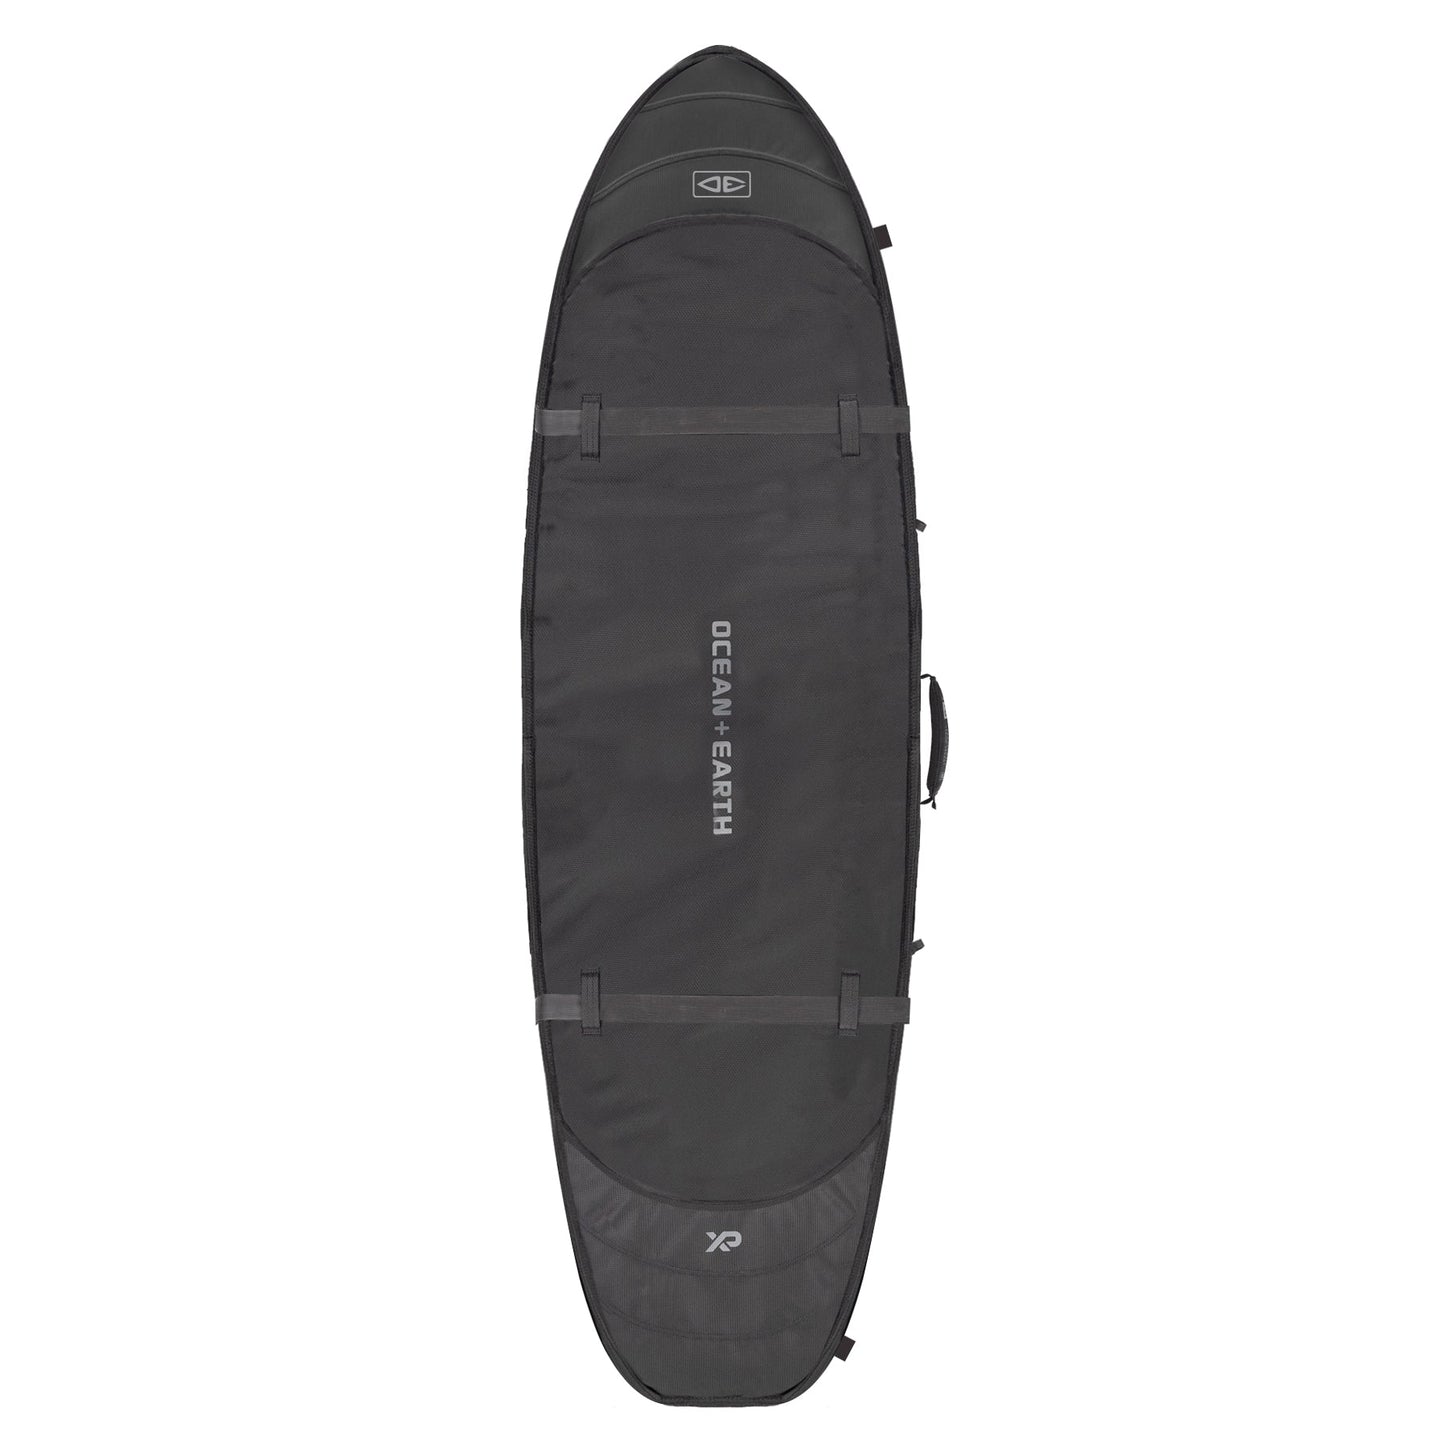 ocean-and-earth-hypa-travel-2-board-6-0-6-6-7-0-7-6-8-0-double-coffin-surfboard-bag-surfboard-protection-galway-ireland-blacksheepsurfco-front